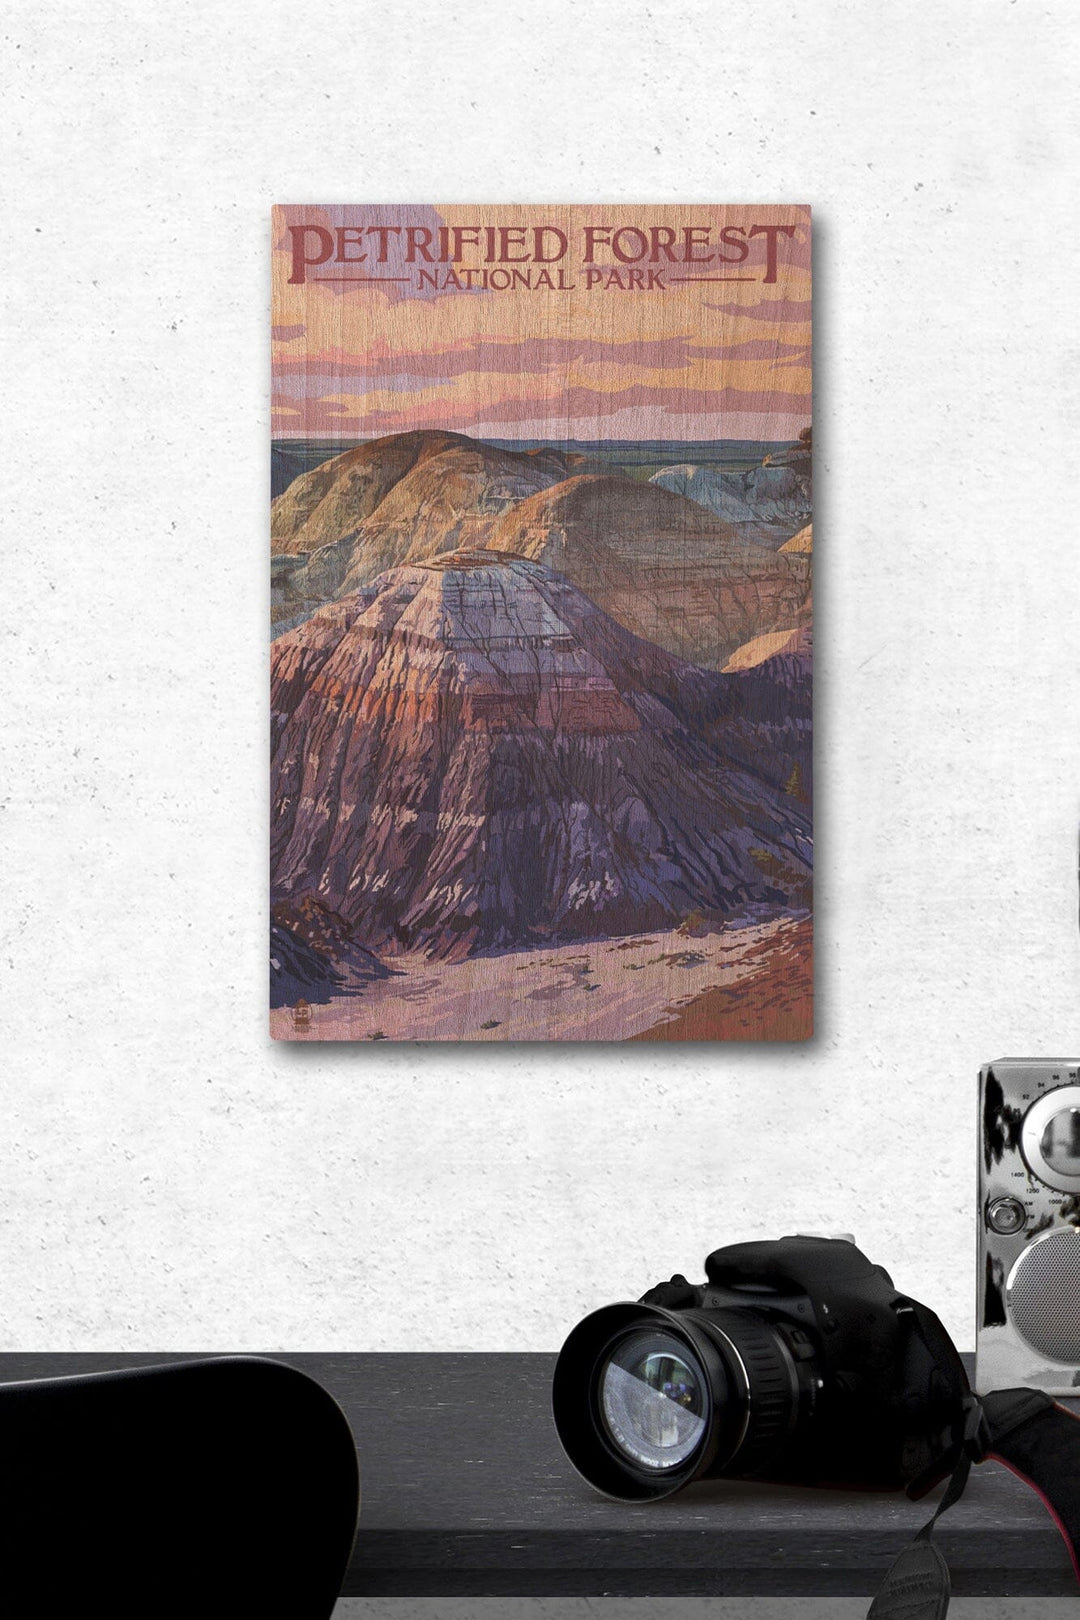 Petrified Forest National Park, Arizona, Chinle Formation, Lantern Press Artwork, Wood Signs and Postcards Wood Lantern Press 12 x 18 Wood Gallery Print 